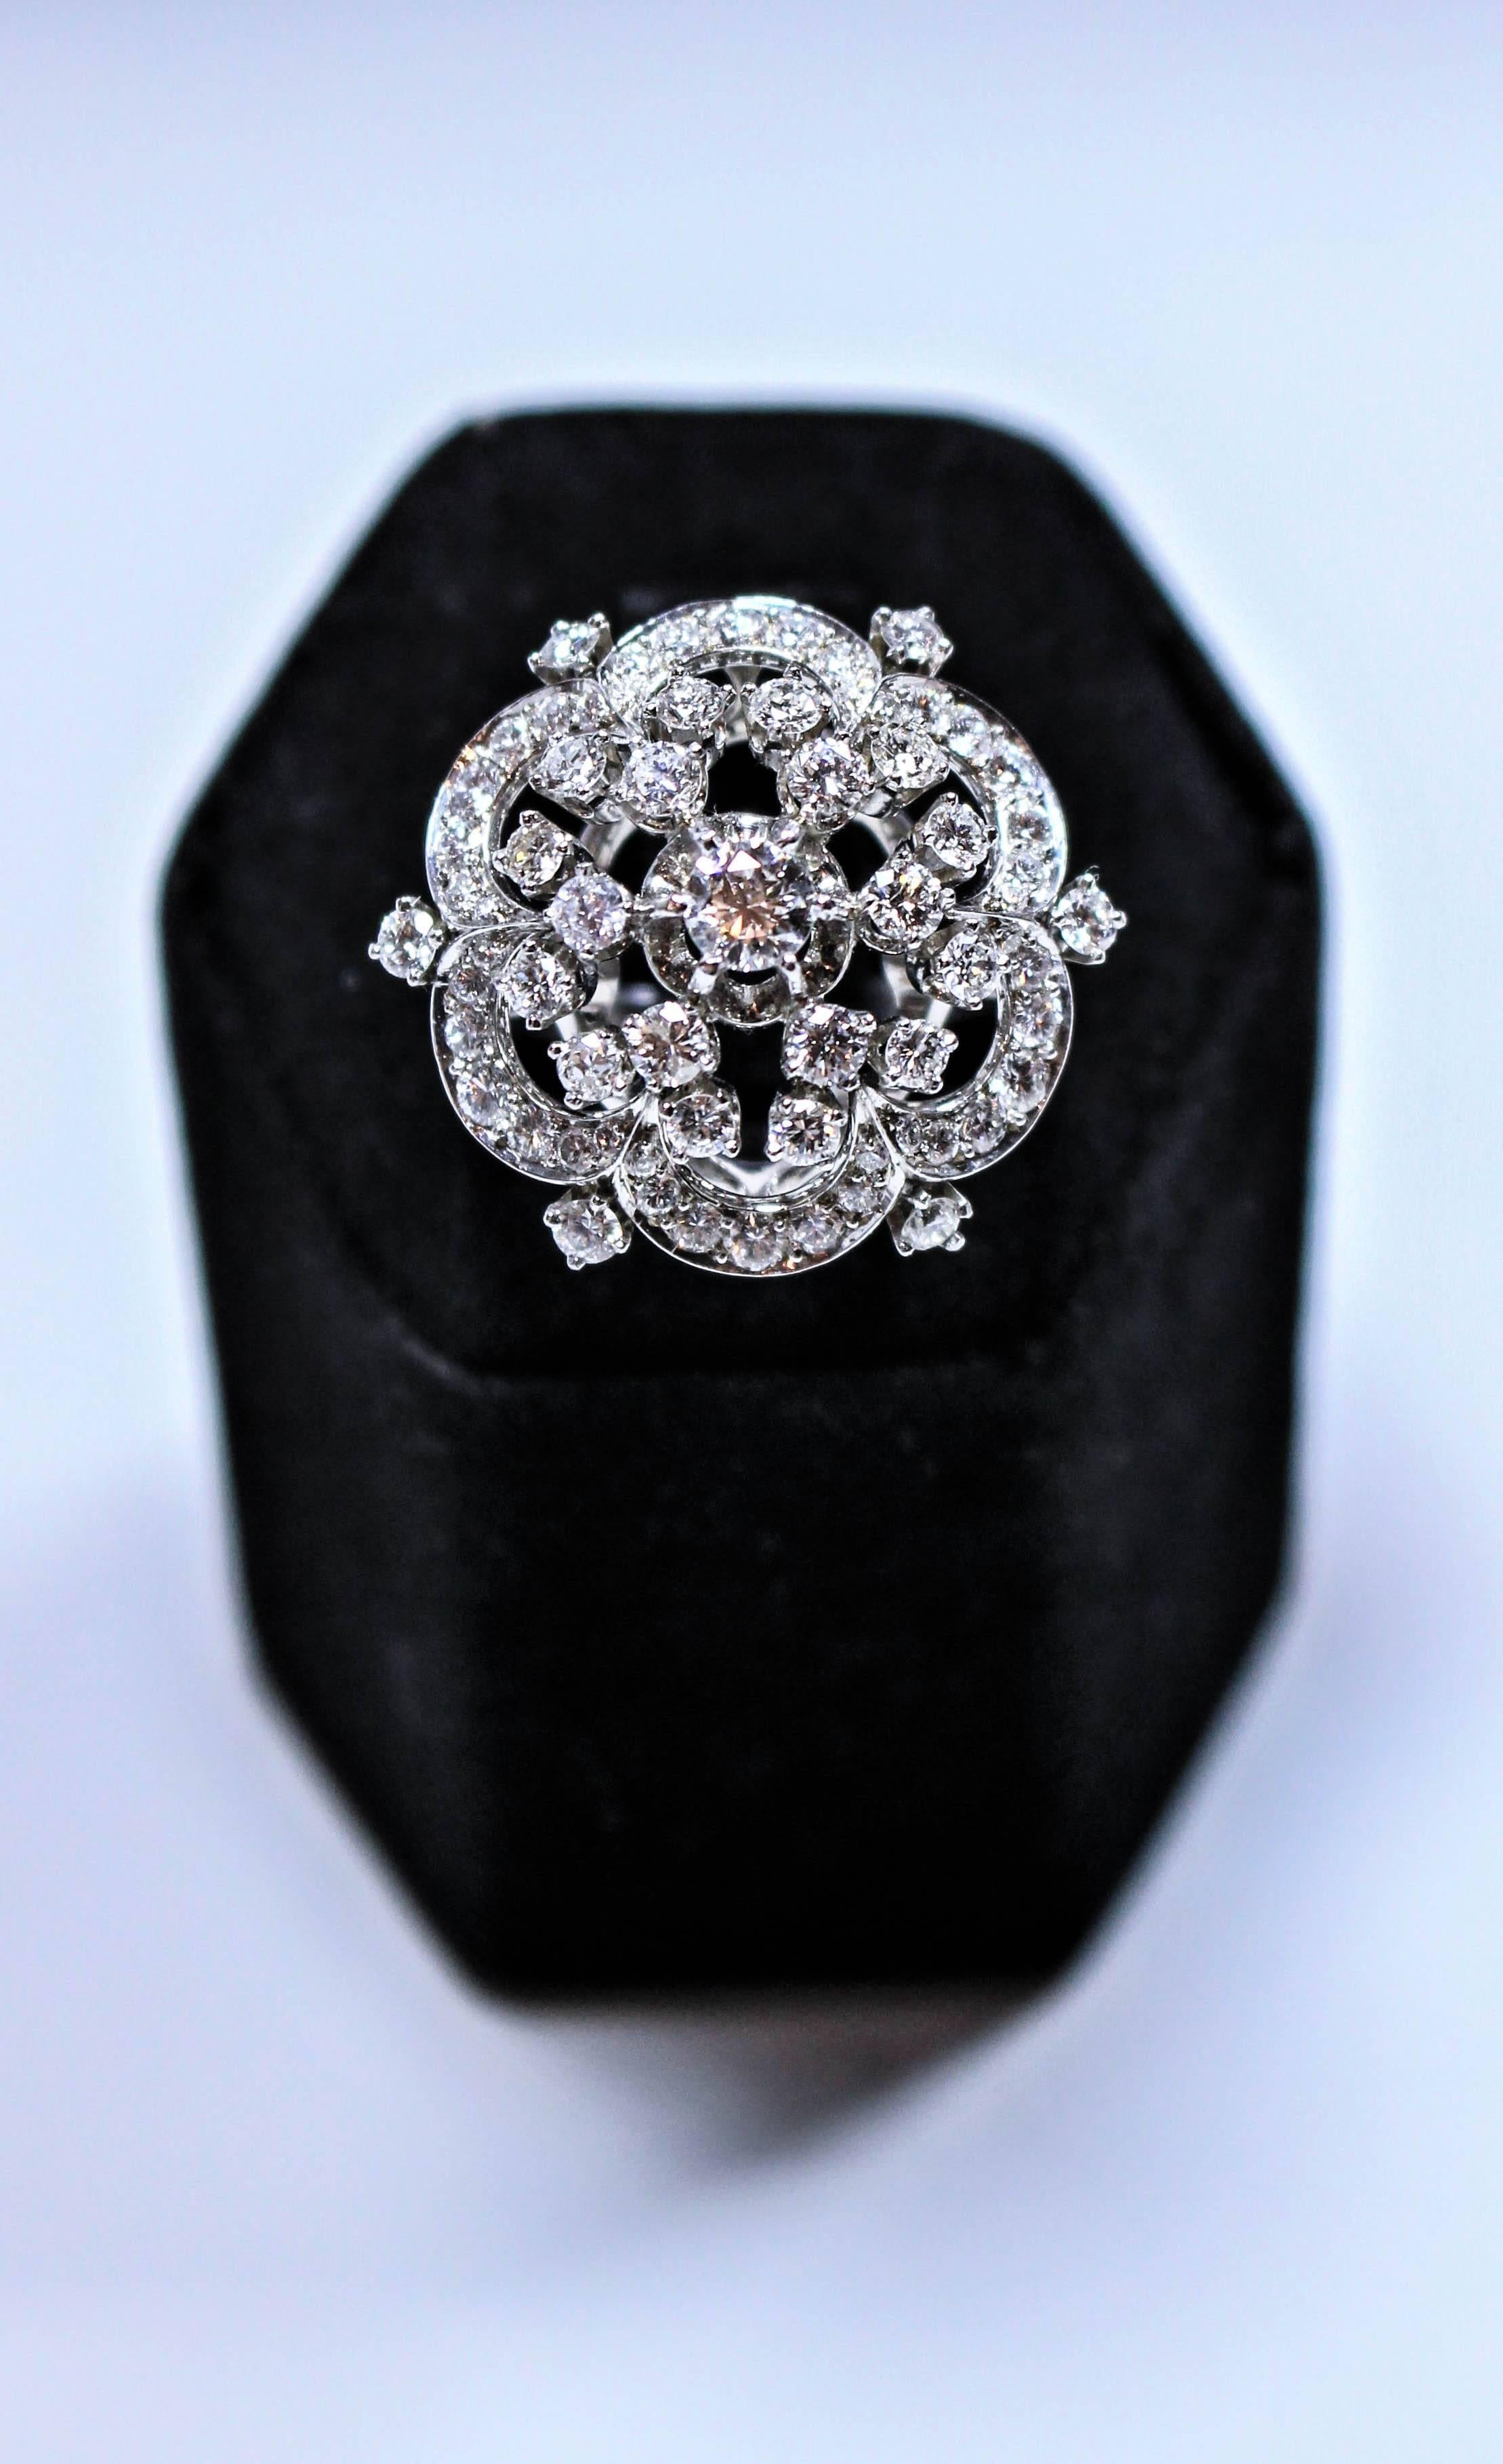 This brooch style ring is composed of platinum and diamonds, Features a 0.25 carat center stone with 66 smaller diamonds accented throughout. A beautiful and stunning timeless design, so chic. Size 6.5 easily sizable.

Please feel free to ask any